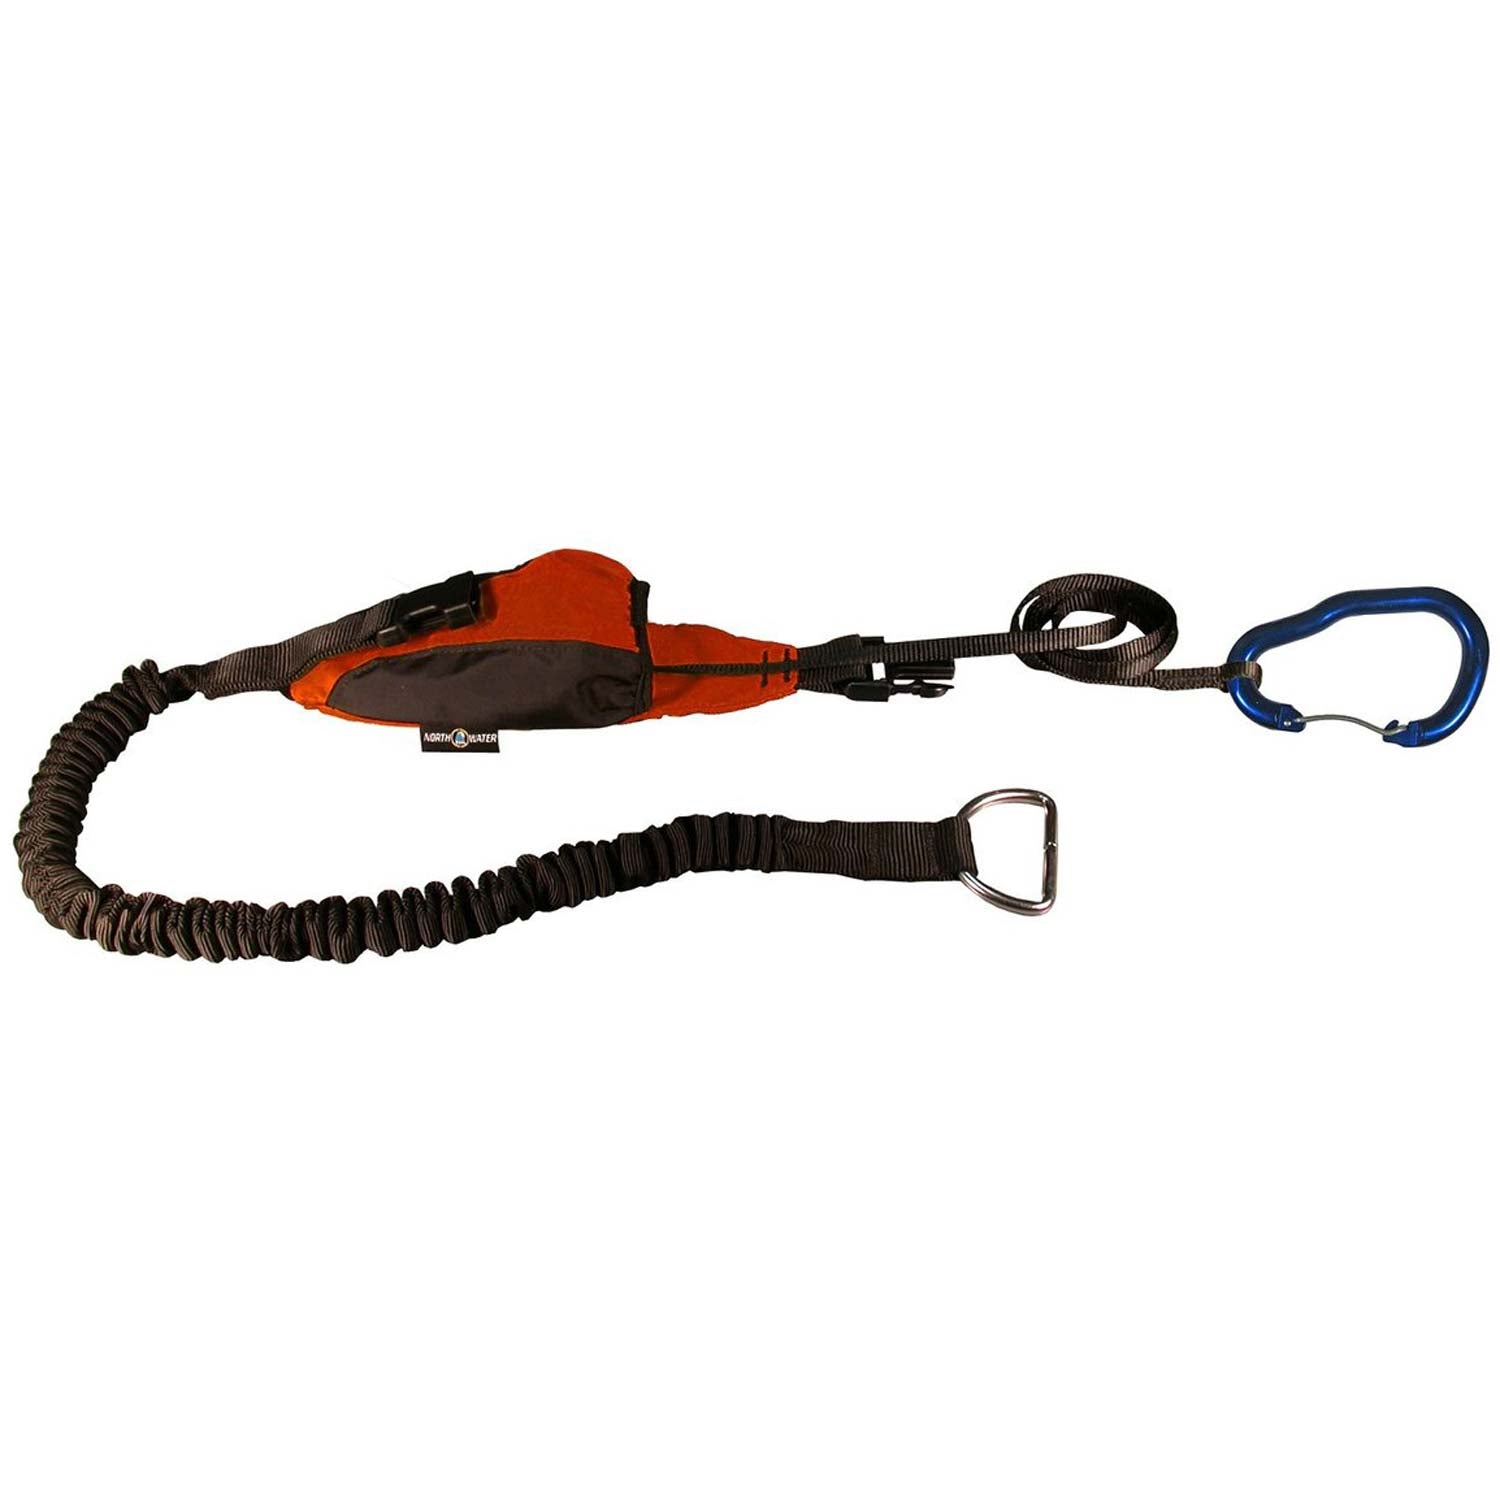 Sea kayak towline from NRS